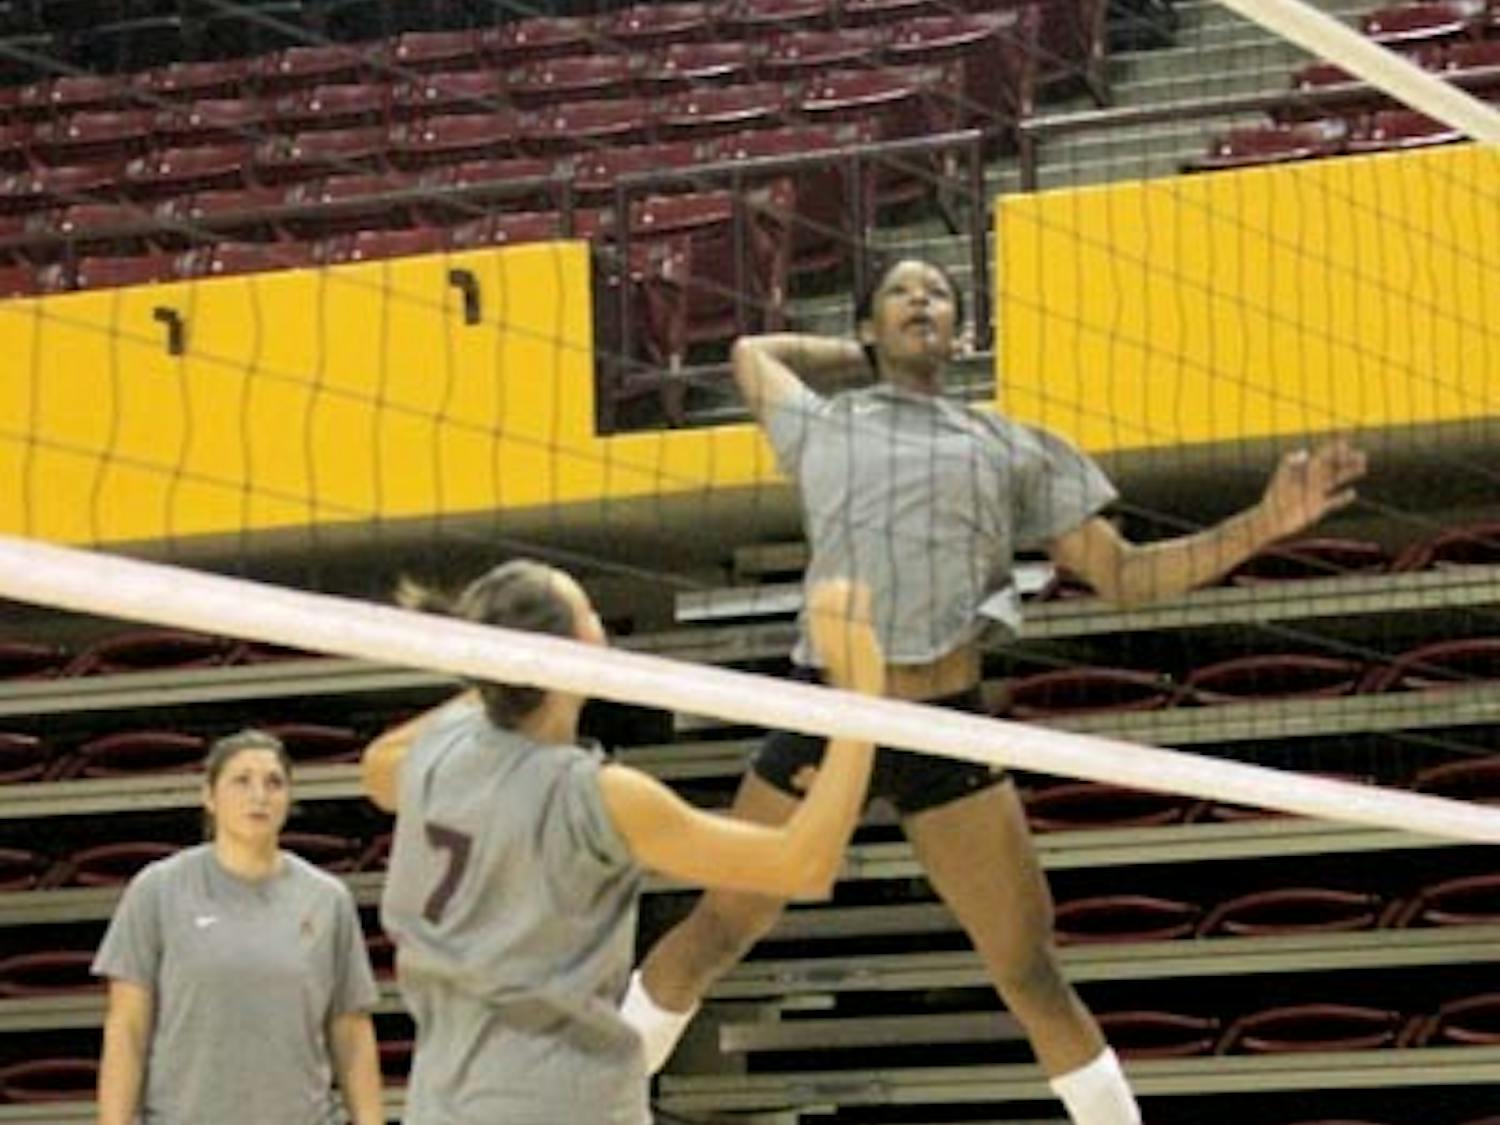 SET ON PERFECTION: Sophomore middle blocker Erica Wilson prepares a spike after a set up from junior setter Cat Highmark at practice last week. The Sun Devils open their season Friday at the Dayton Flyer Classic. (Photo by Andy Jeffreys)